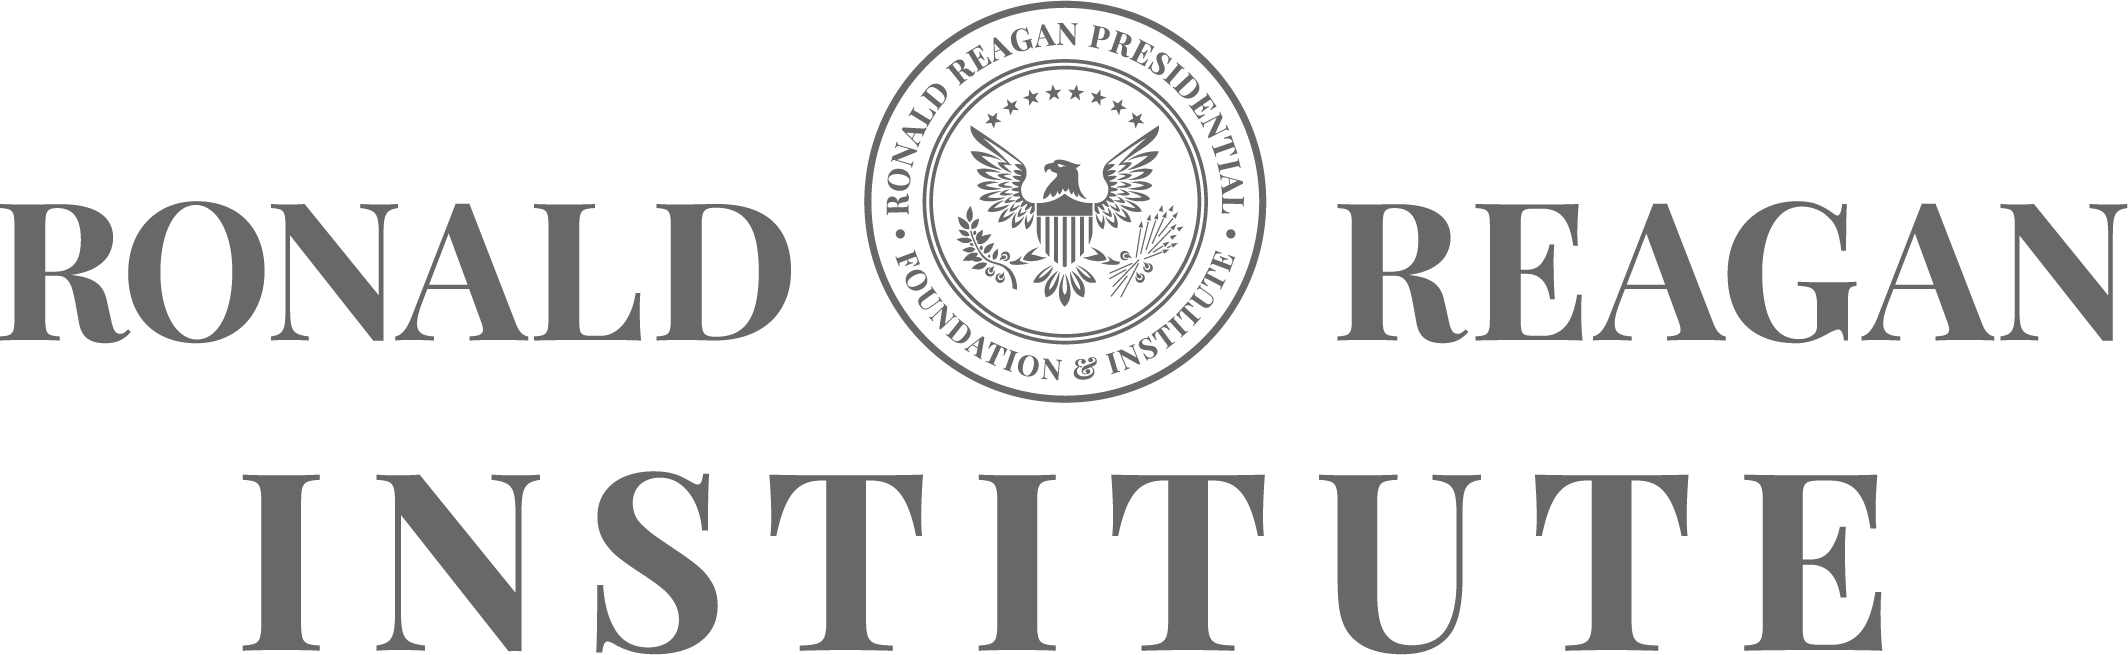 The Reagan Foundation and Institute